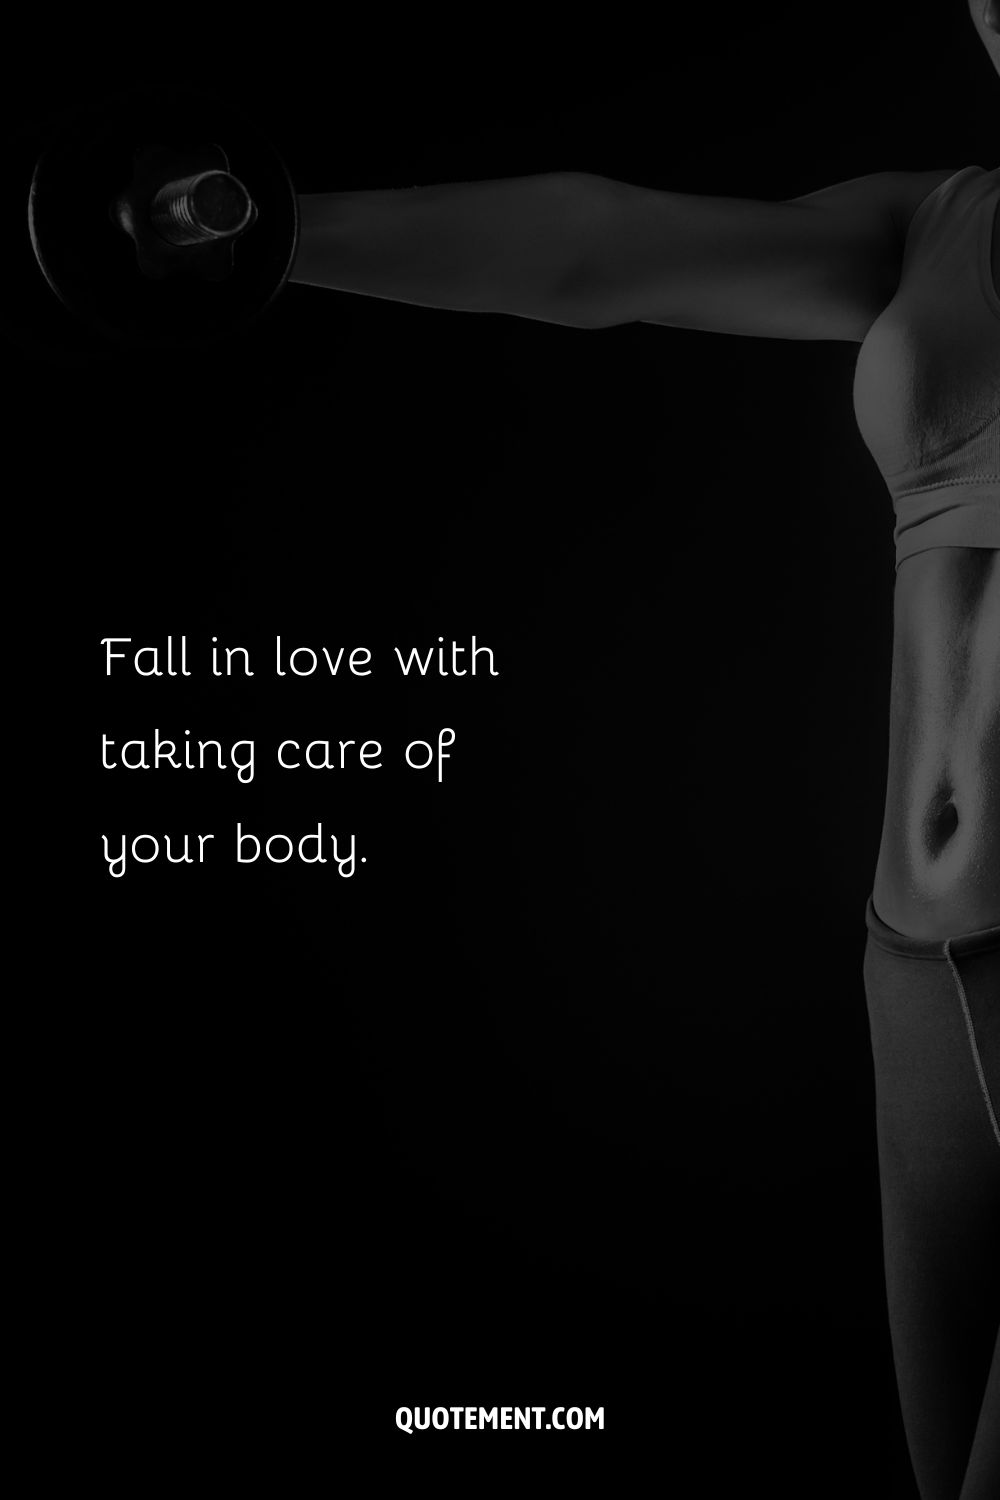 Fall in love with taking care of your body